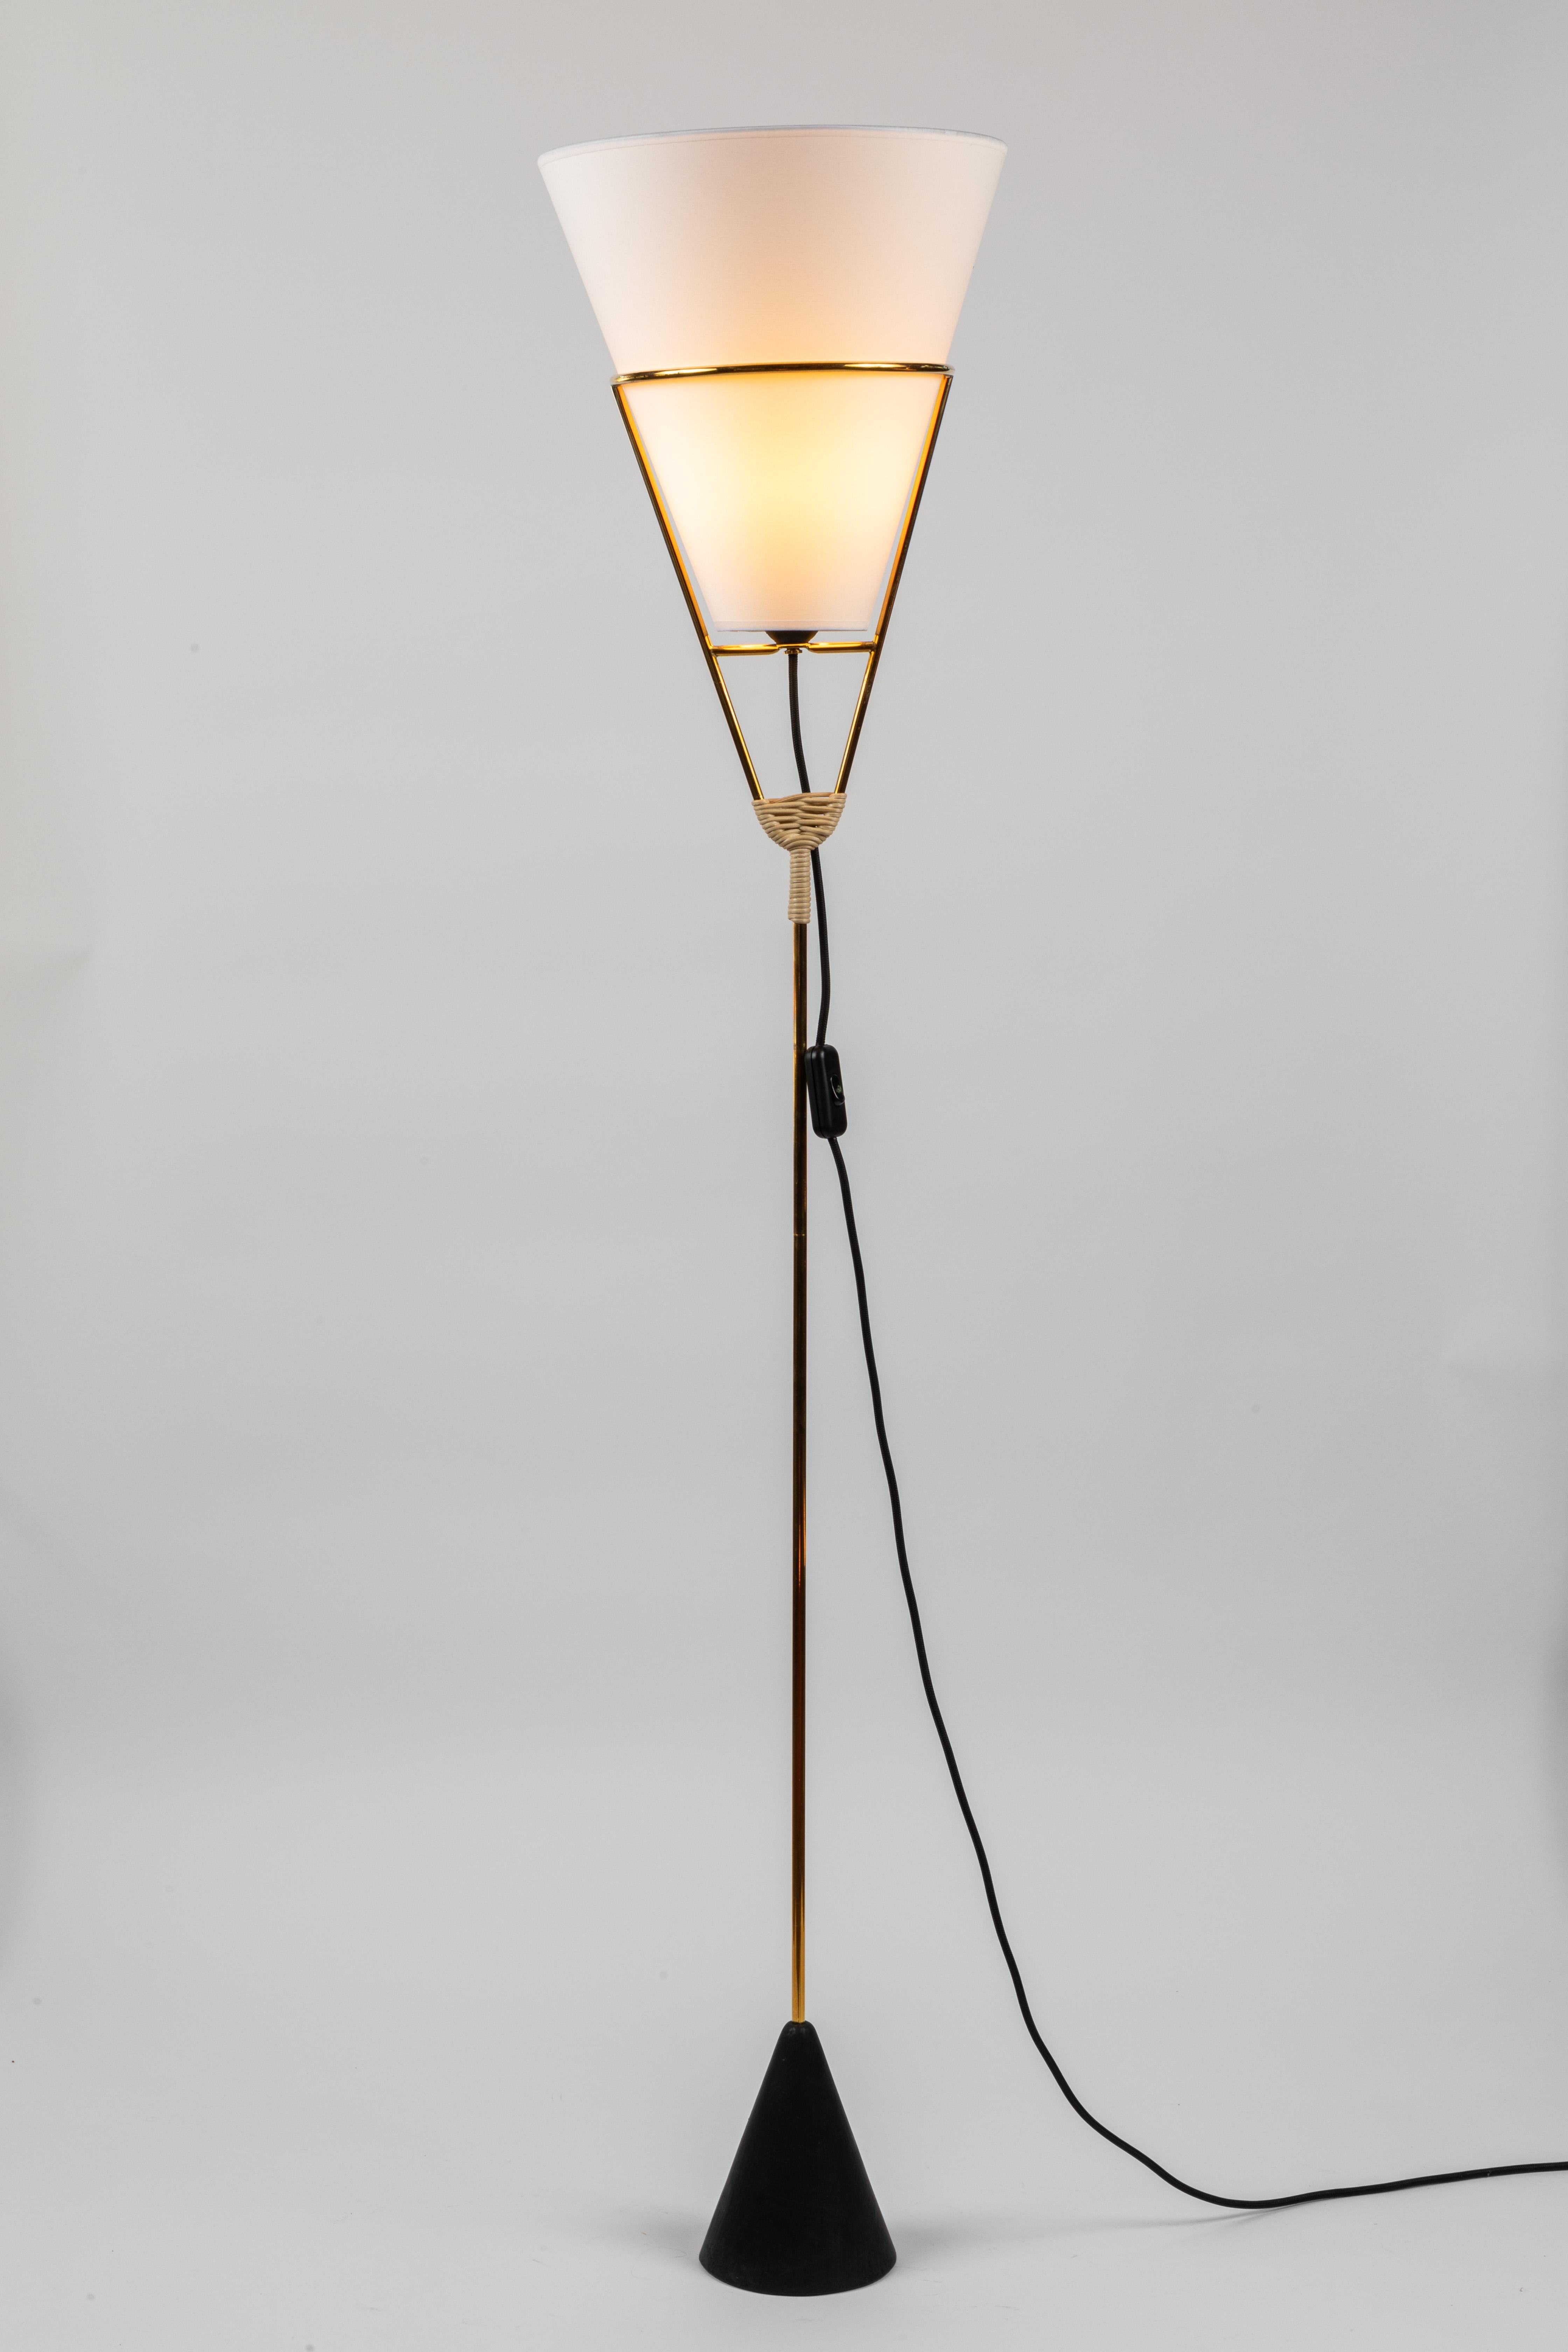 Pair of Carl Auböck Vice Versa Floor Lamps In New Condition For Sale In Glendale, CA